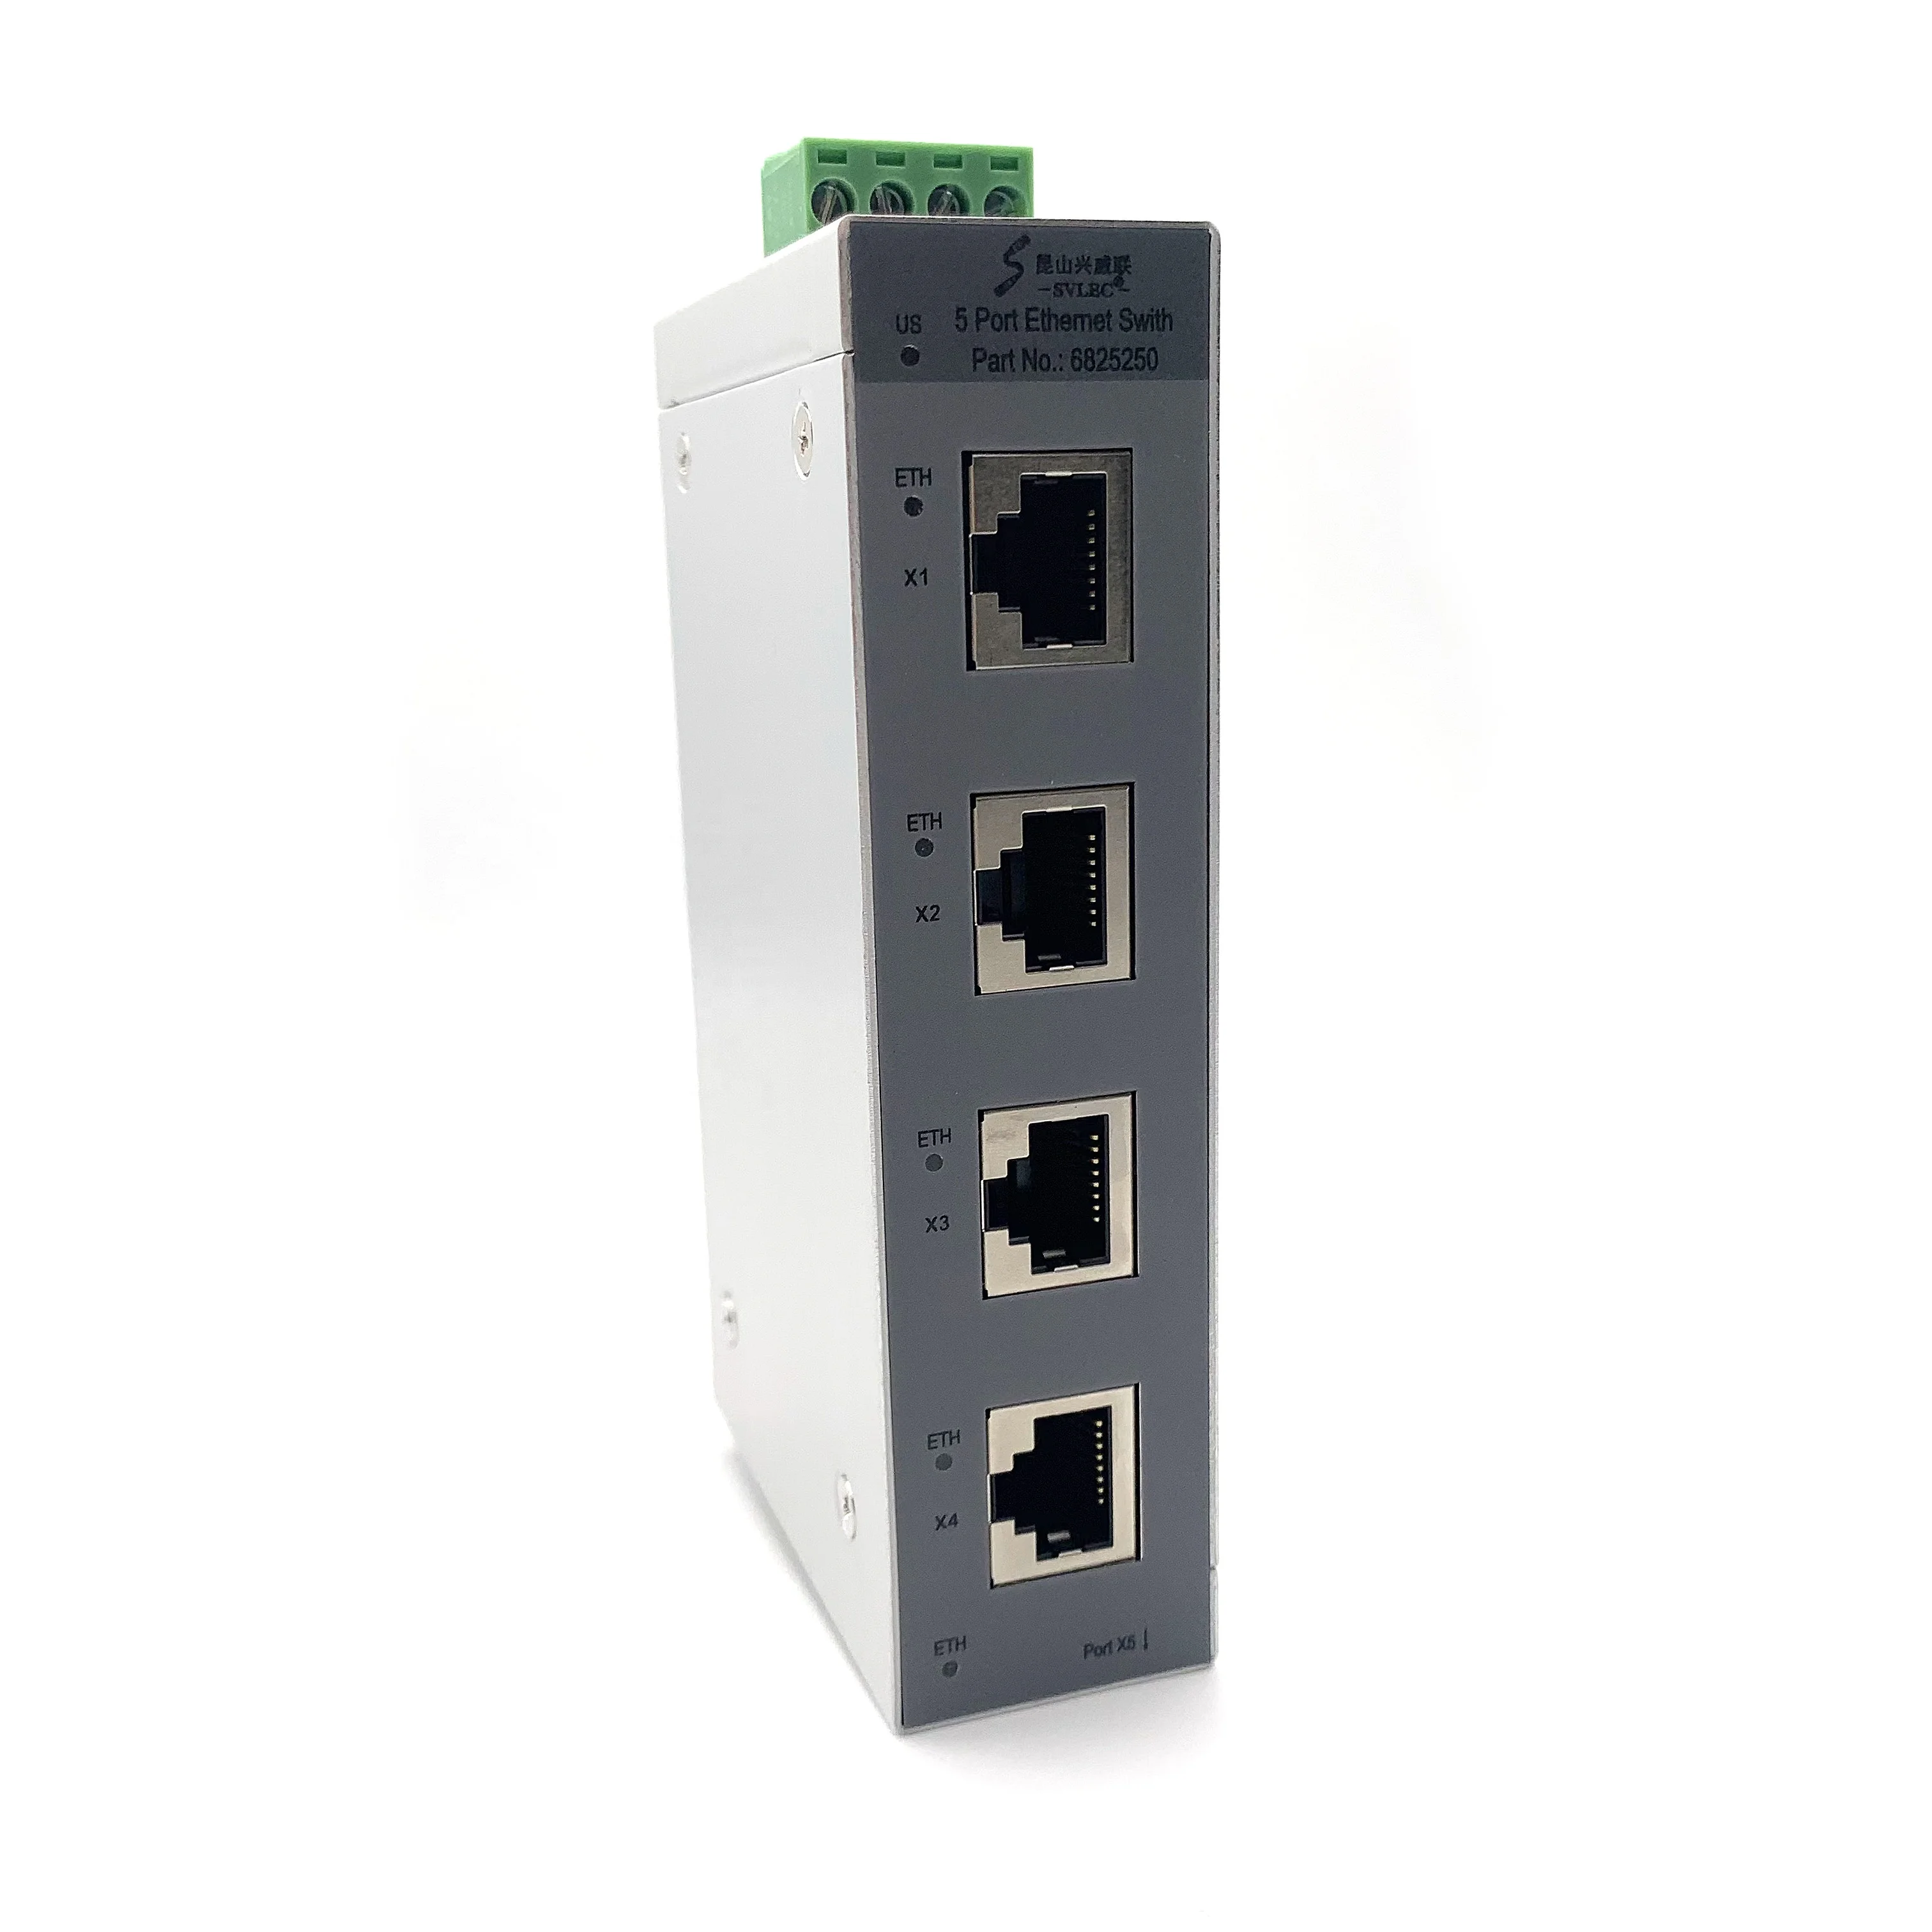 SVLEC industrial network switches with 5 ports  RJ45 entries optical